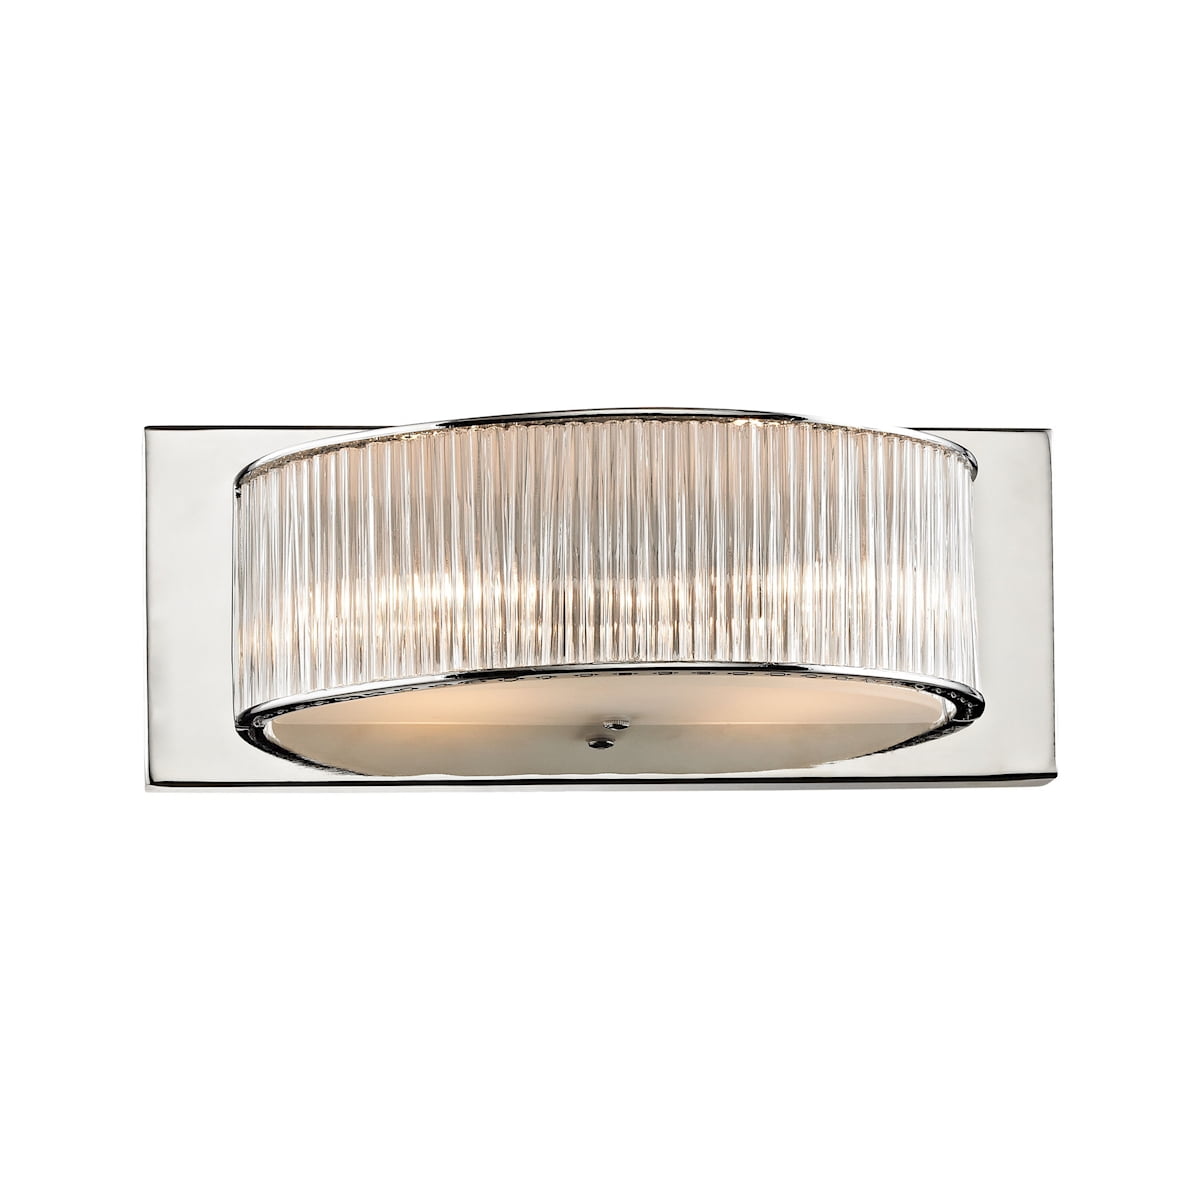 ELK Lighting Braxton 3 Light Pendant in Polished Nickel and Ribbed Glass Rods